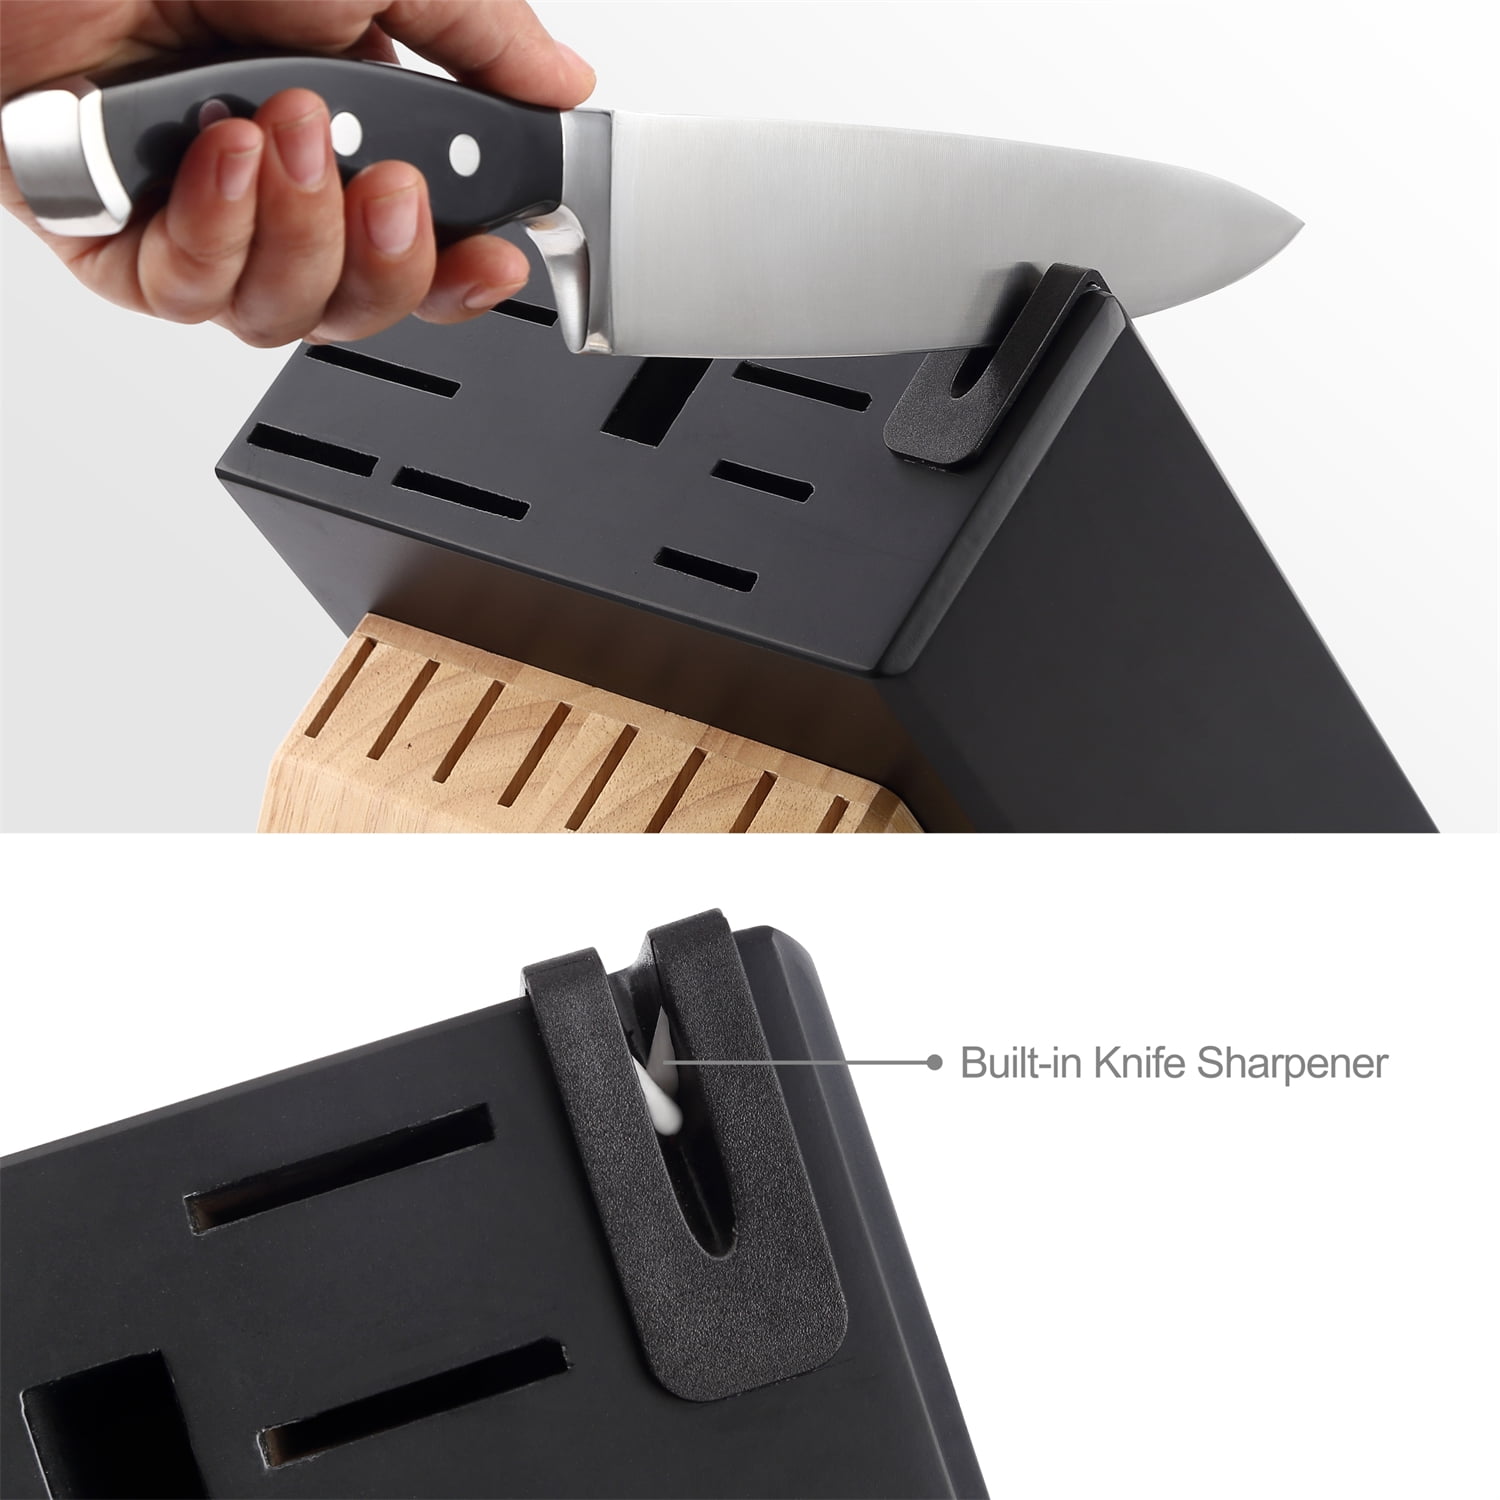 Change your cooking game with our McCook Knife Block Set in store. Visit us  Monday to Saturday 9am to 5pm at our Millhouse & Home…